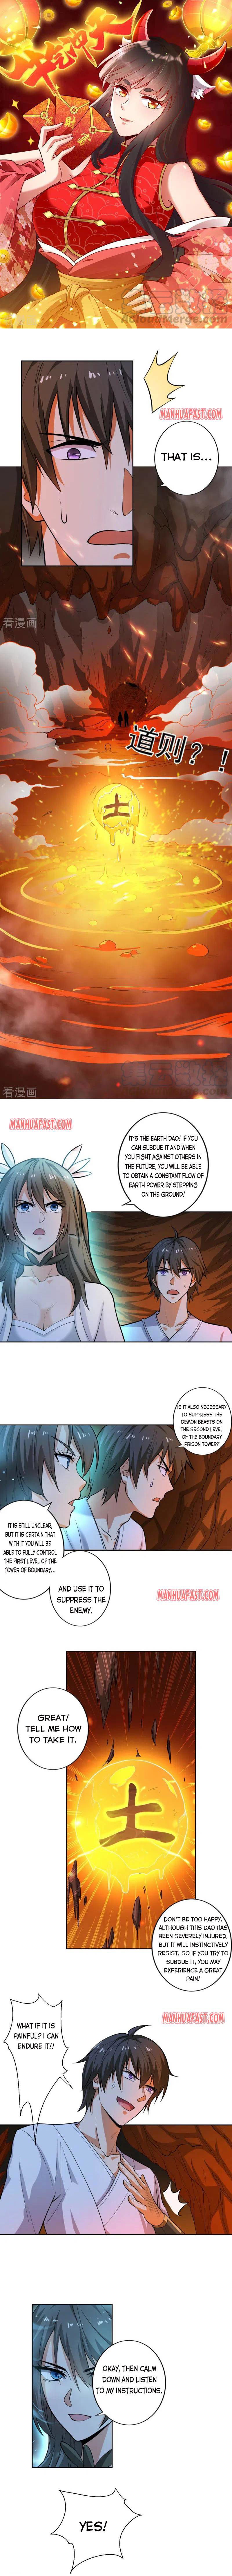 One Sword Reigns Supreme Chapter 99 page 1